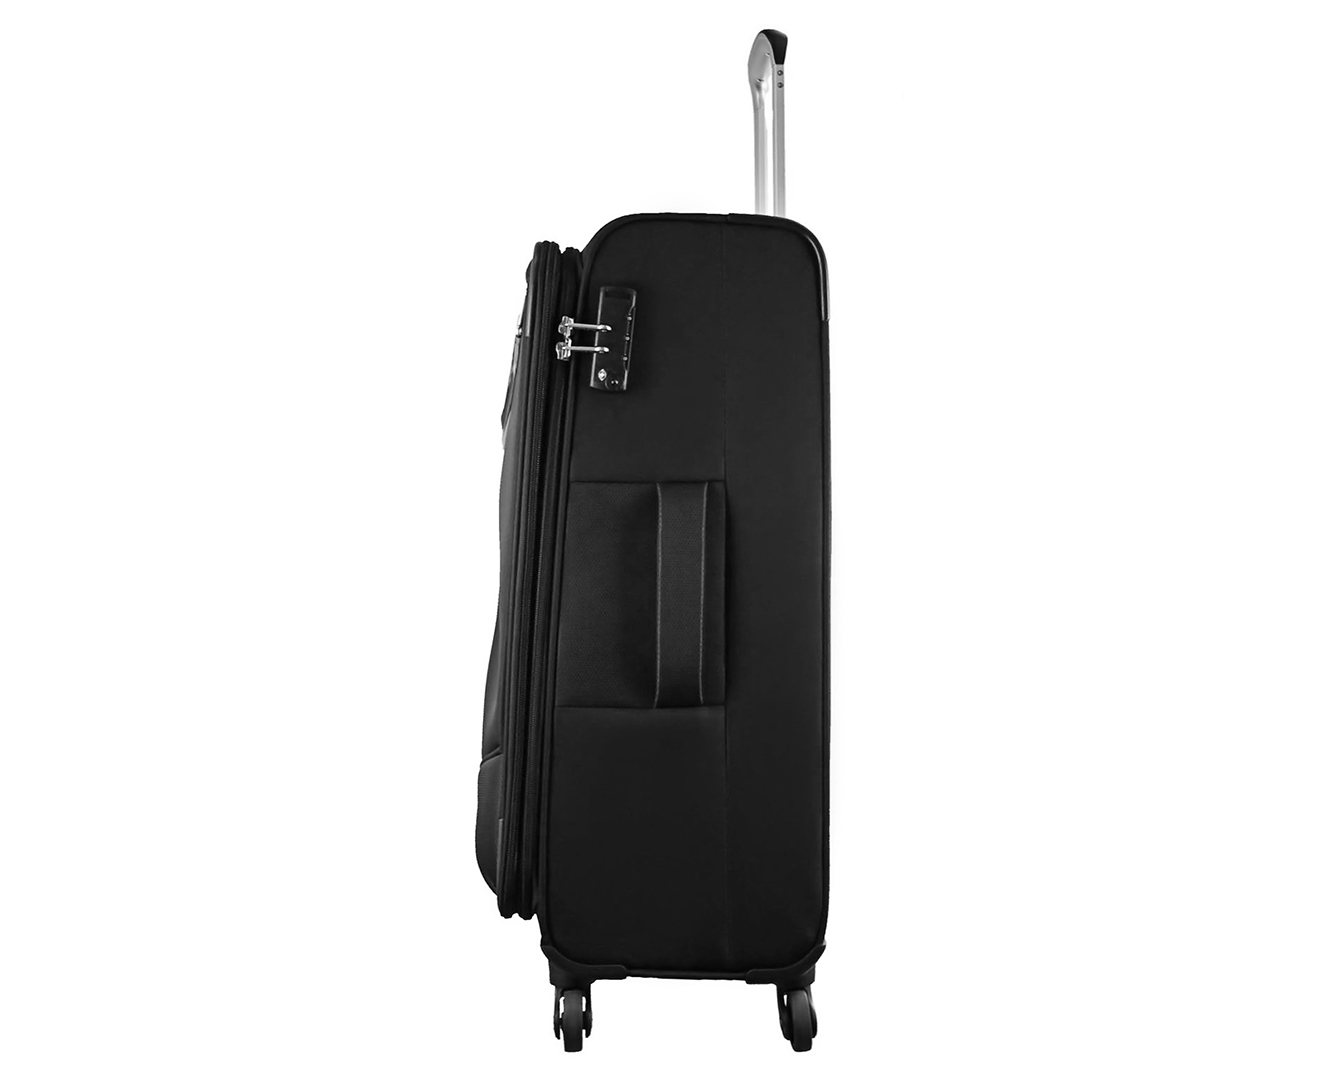 Pierre Cardin Large Softcase Luggage / Suitcase - Black | Catch.co.nz